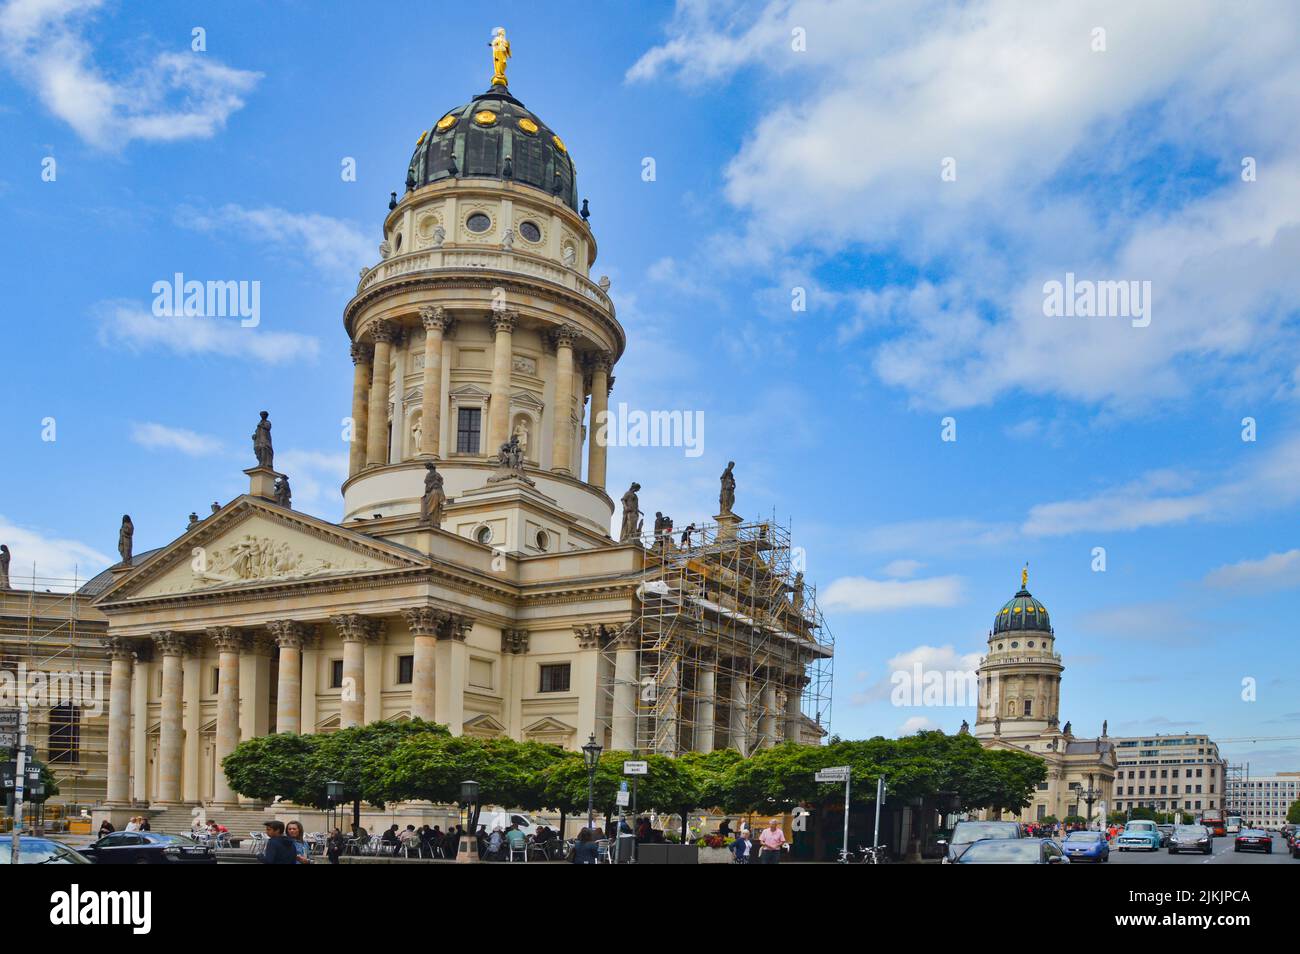 A beautiful shot of the German church at Gendarmenmarkt square against blue sky on a sunny day in Berlin, Germany. Stock Photo